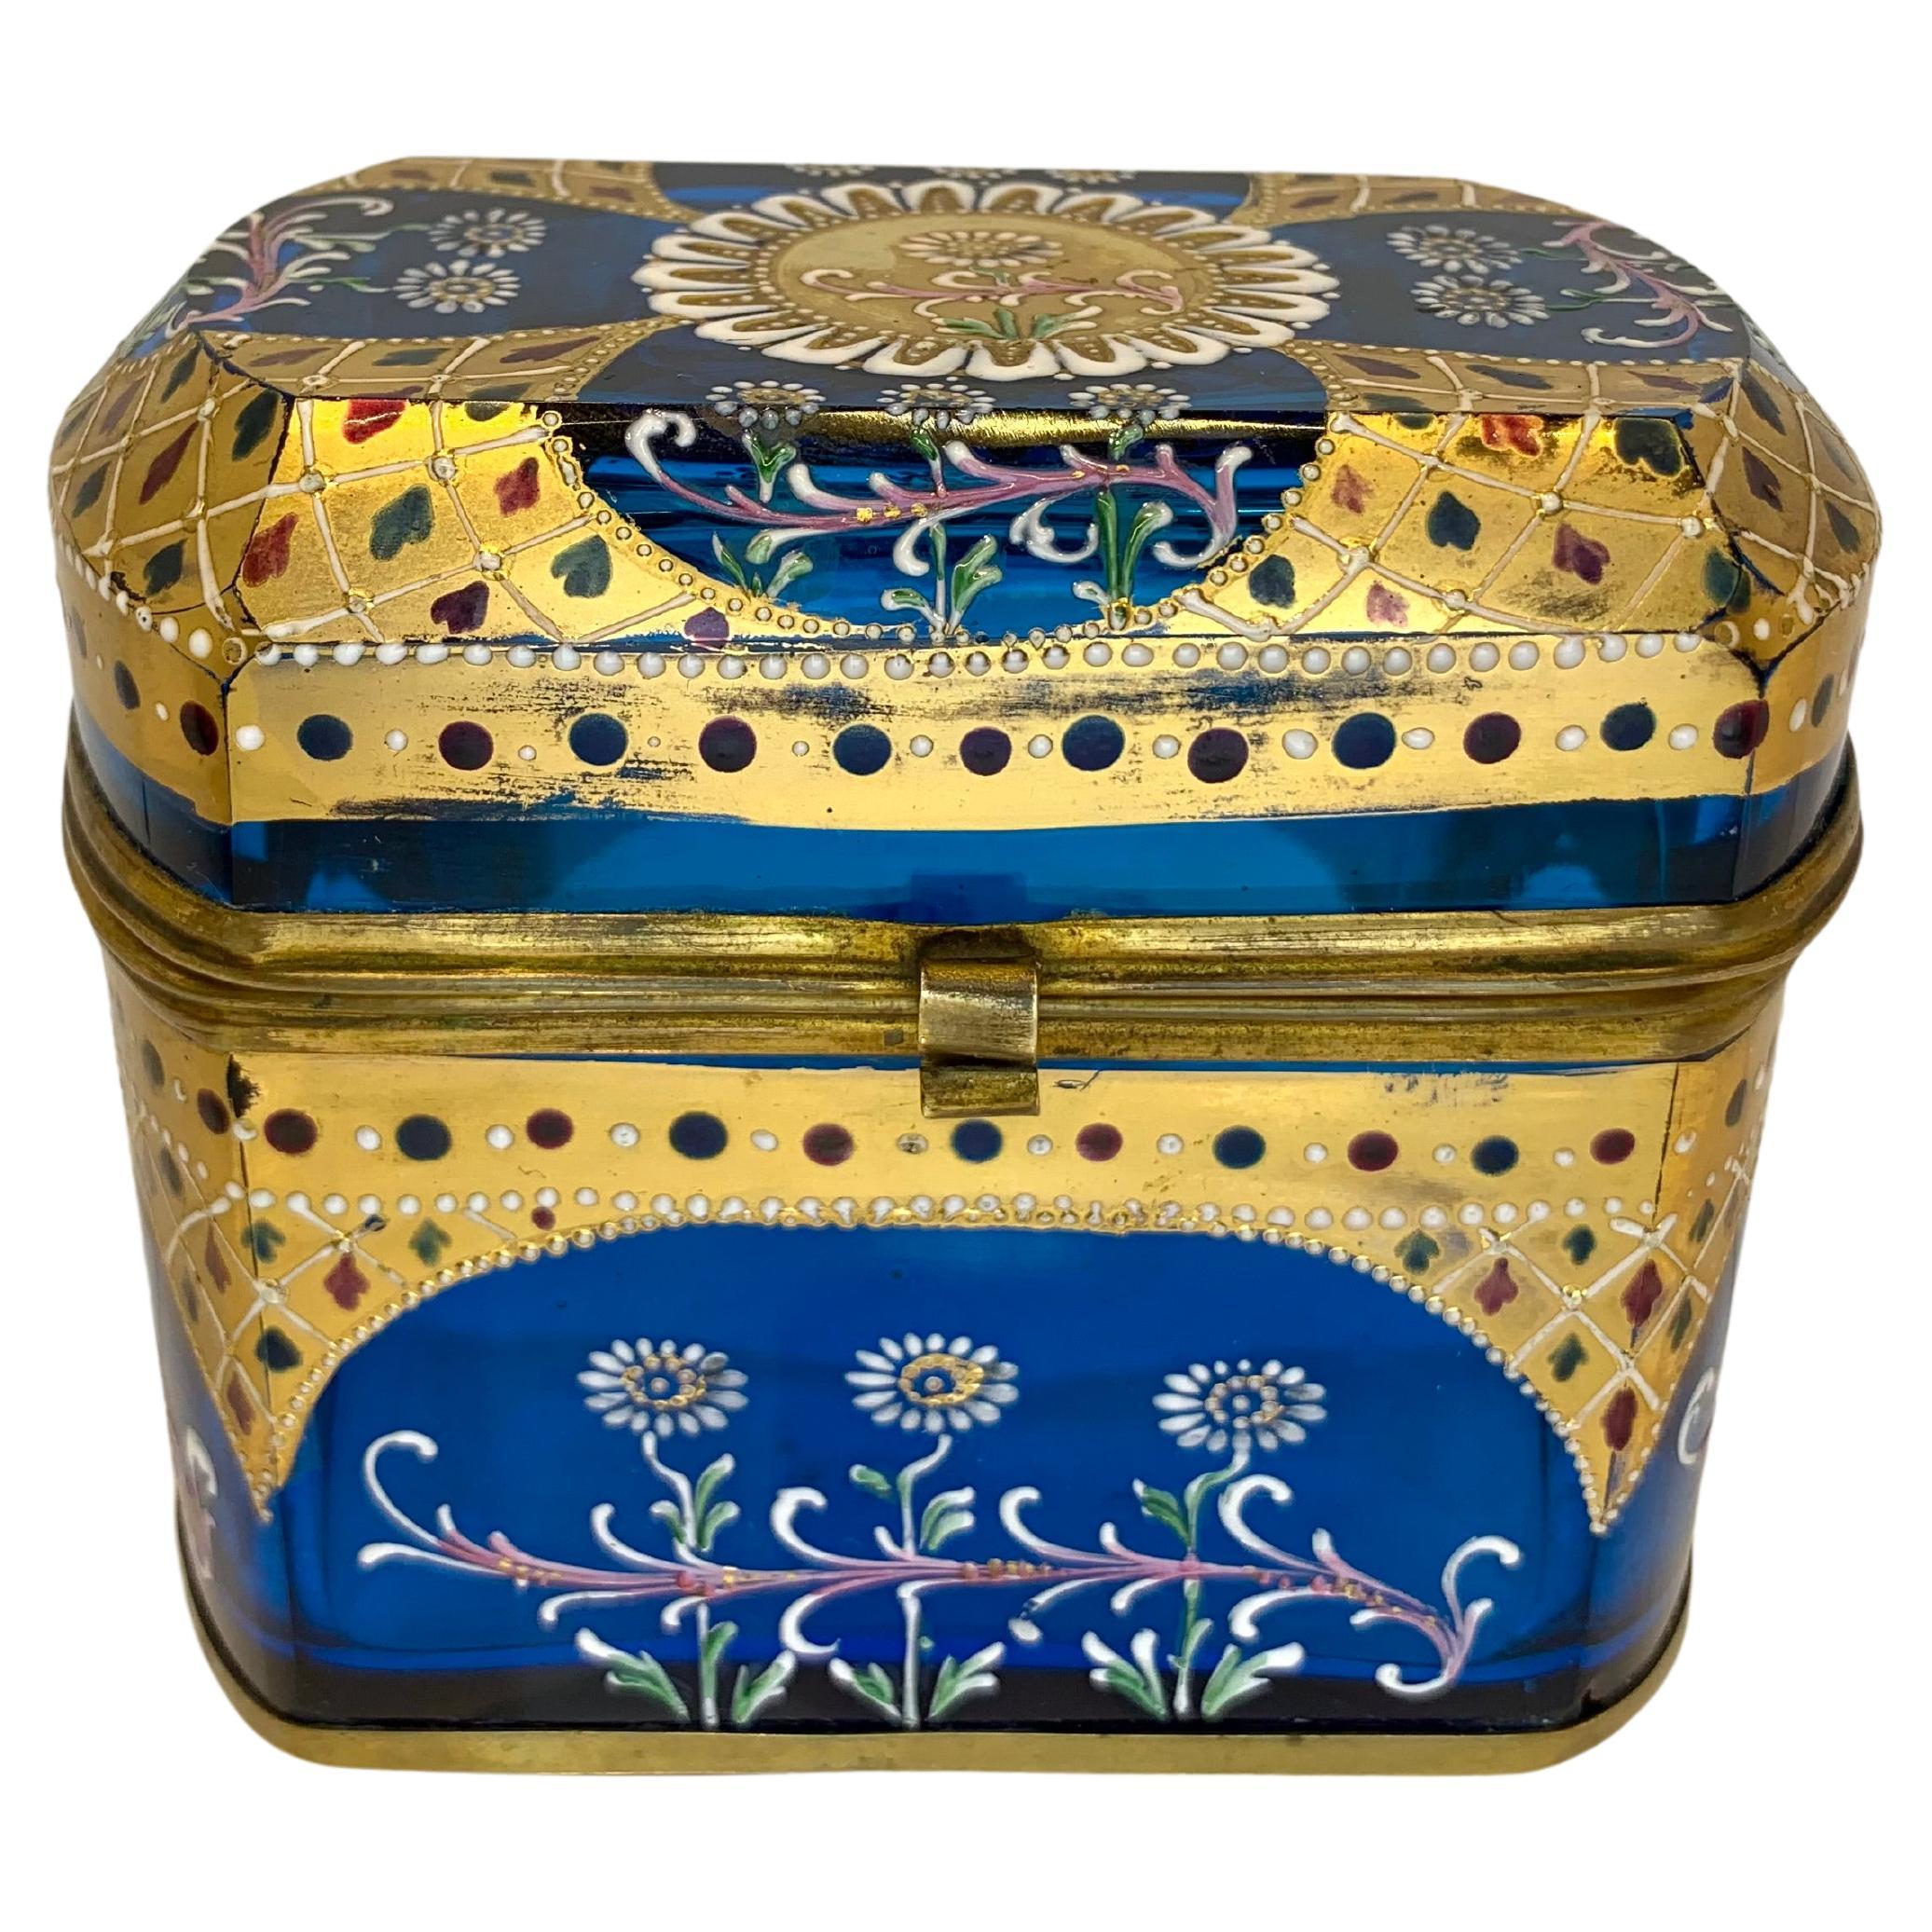 Fine Moser Casket Jewelry Box with Hinged Bronze Mounts

Lid and Base are Both Framed in Bronze

Hand-Painted all Around with 24k Gold and Colorful Enamel Decoration

Bohemia, Moser, 19th C.